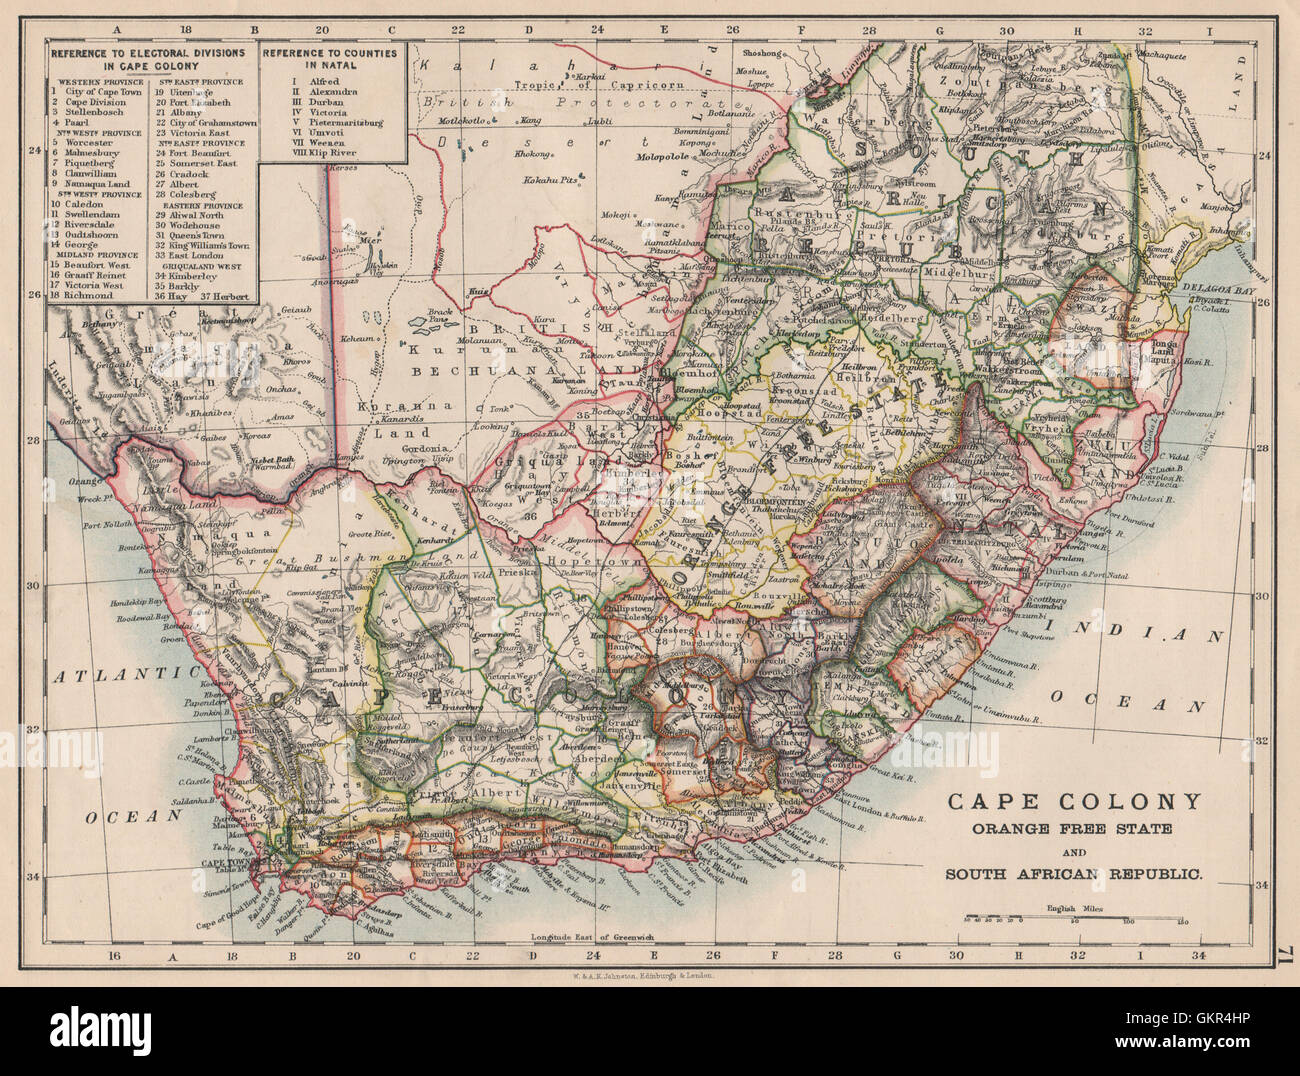 COLONIAL SOUTH AFRICA. Cape Colony. Orange River Colony. Transvaal ...